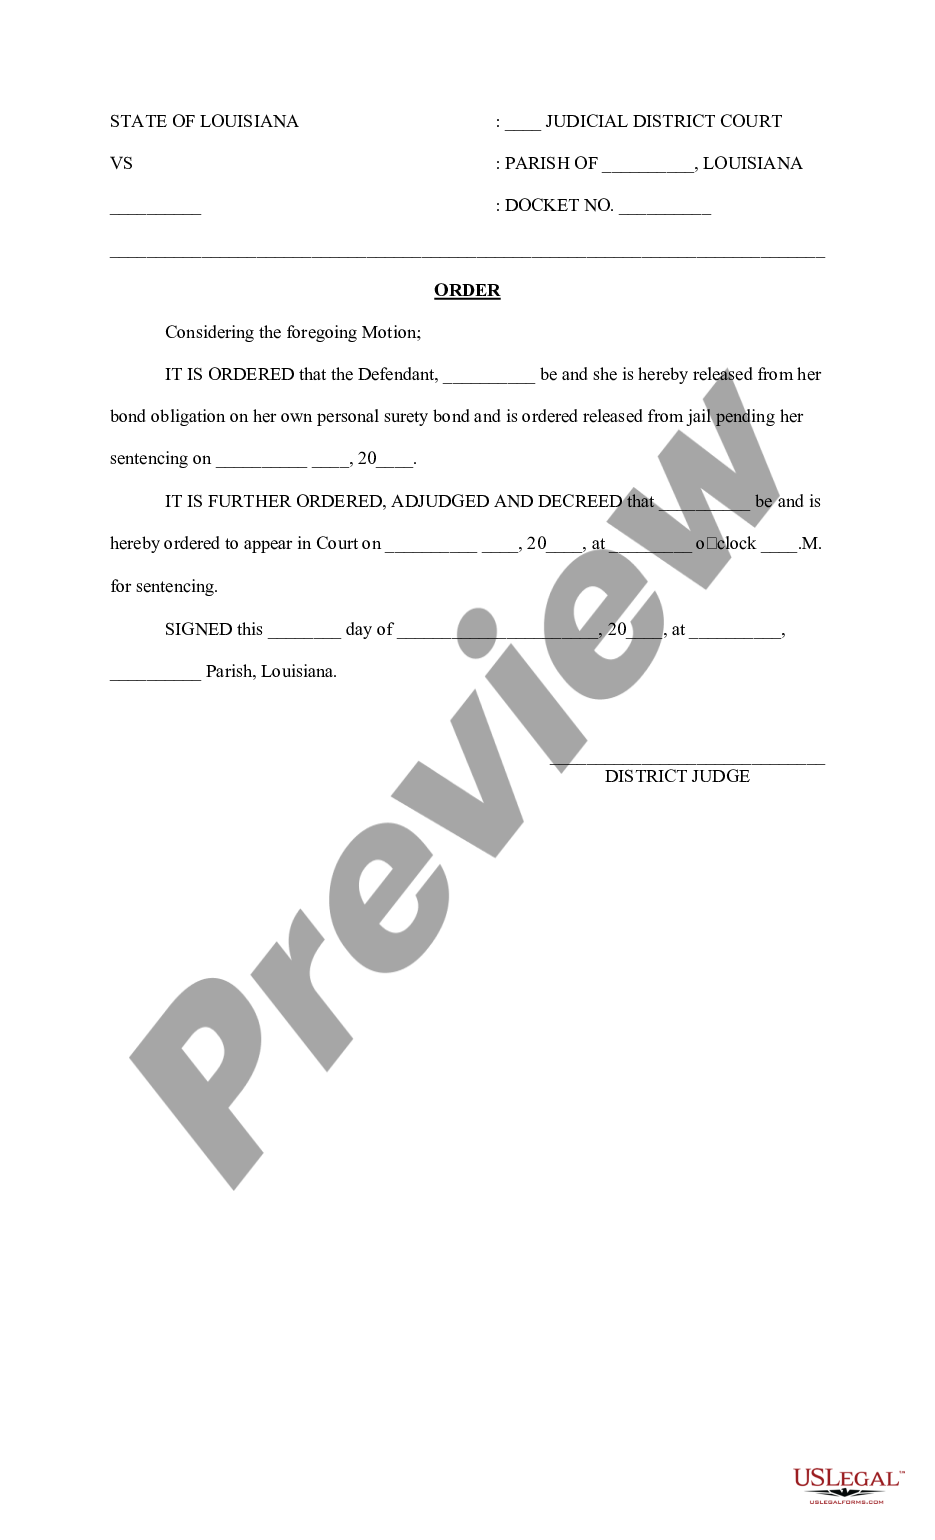 page 1 Motion and Order to Release from Bond Obligation preview